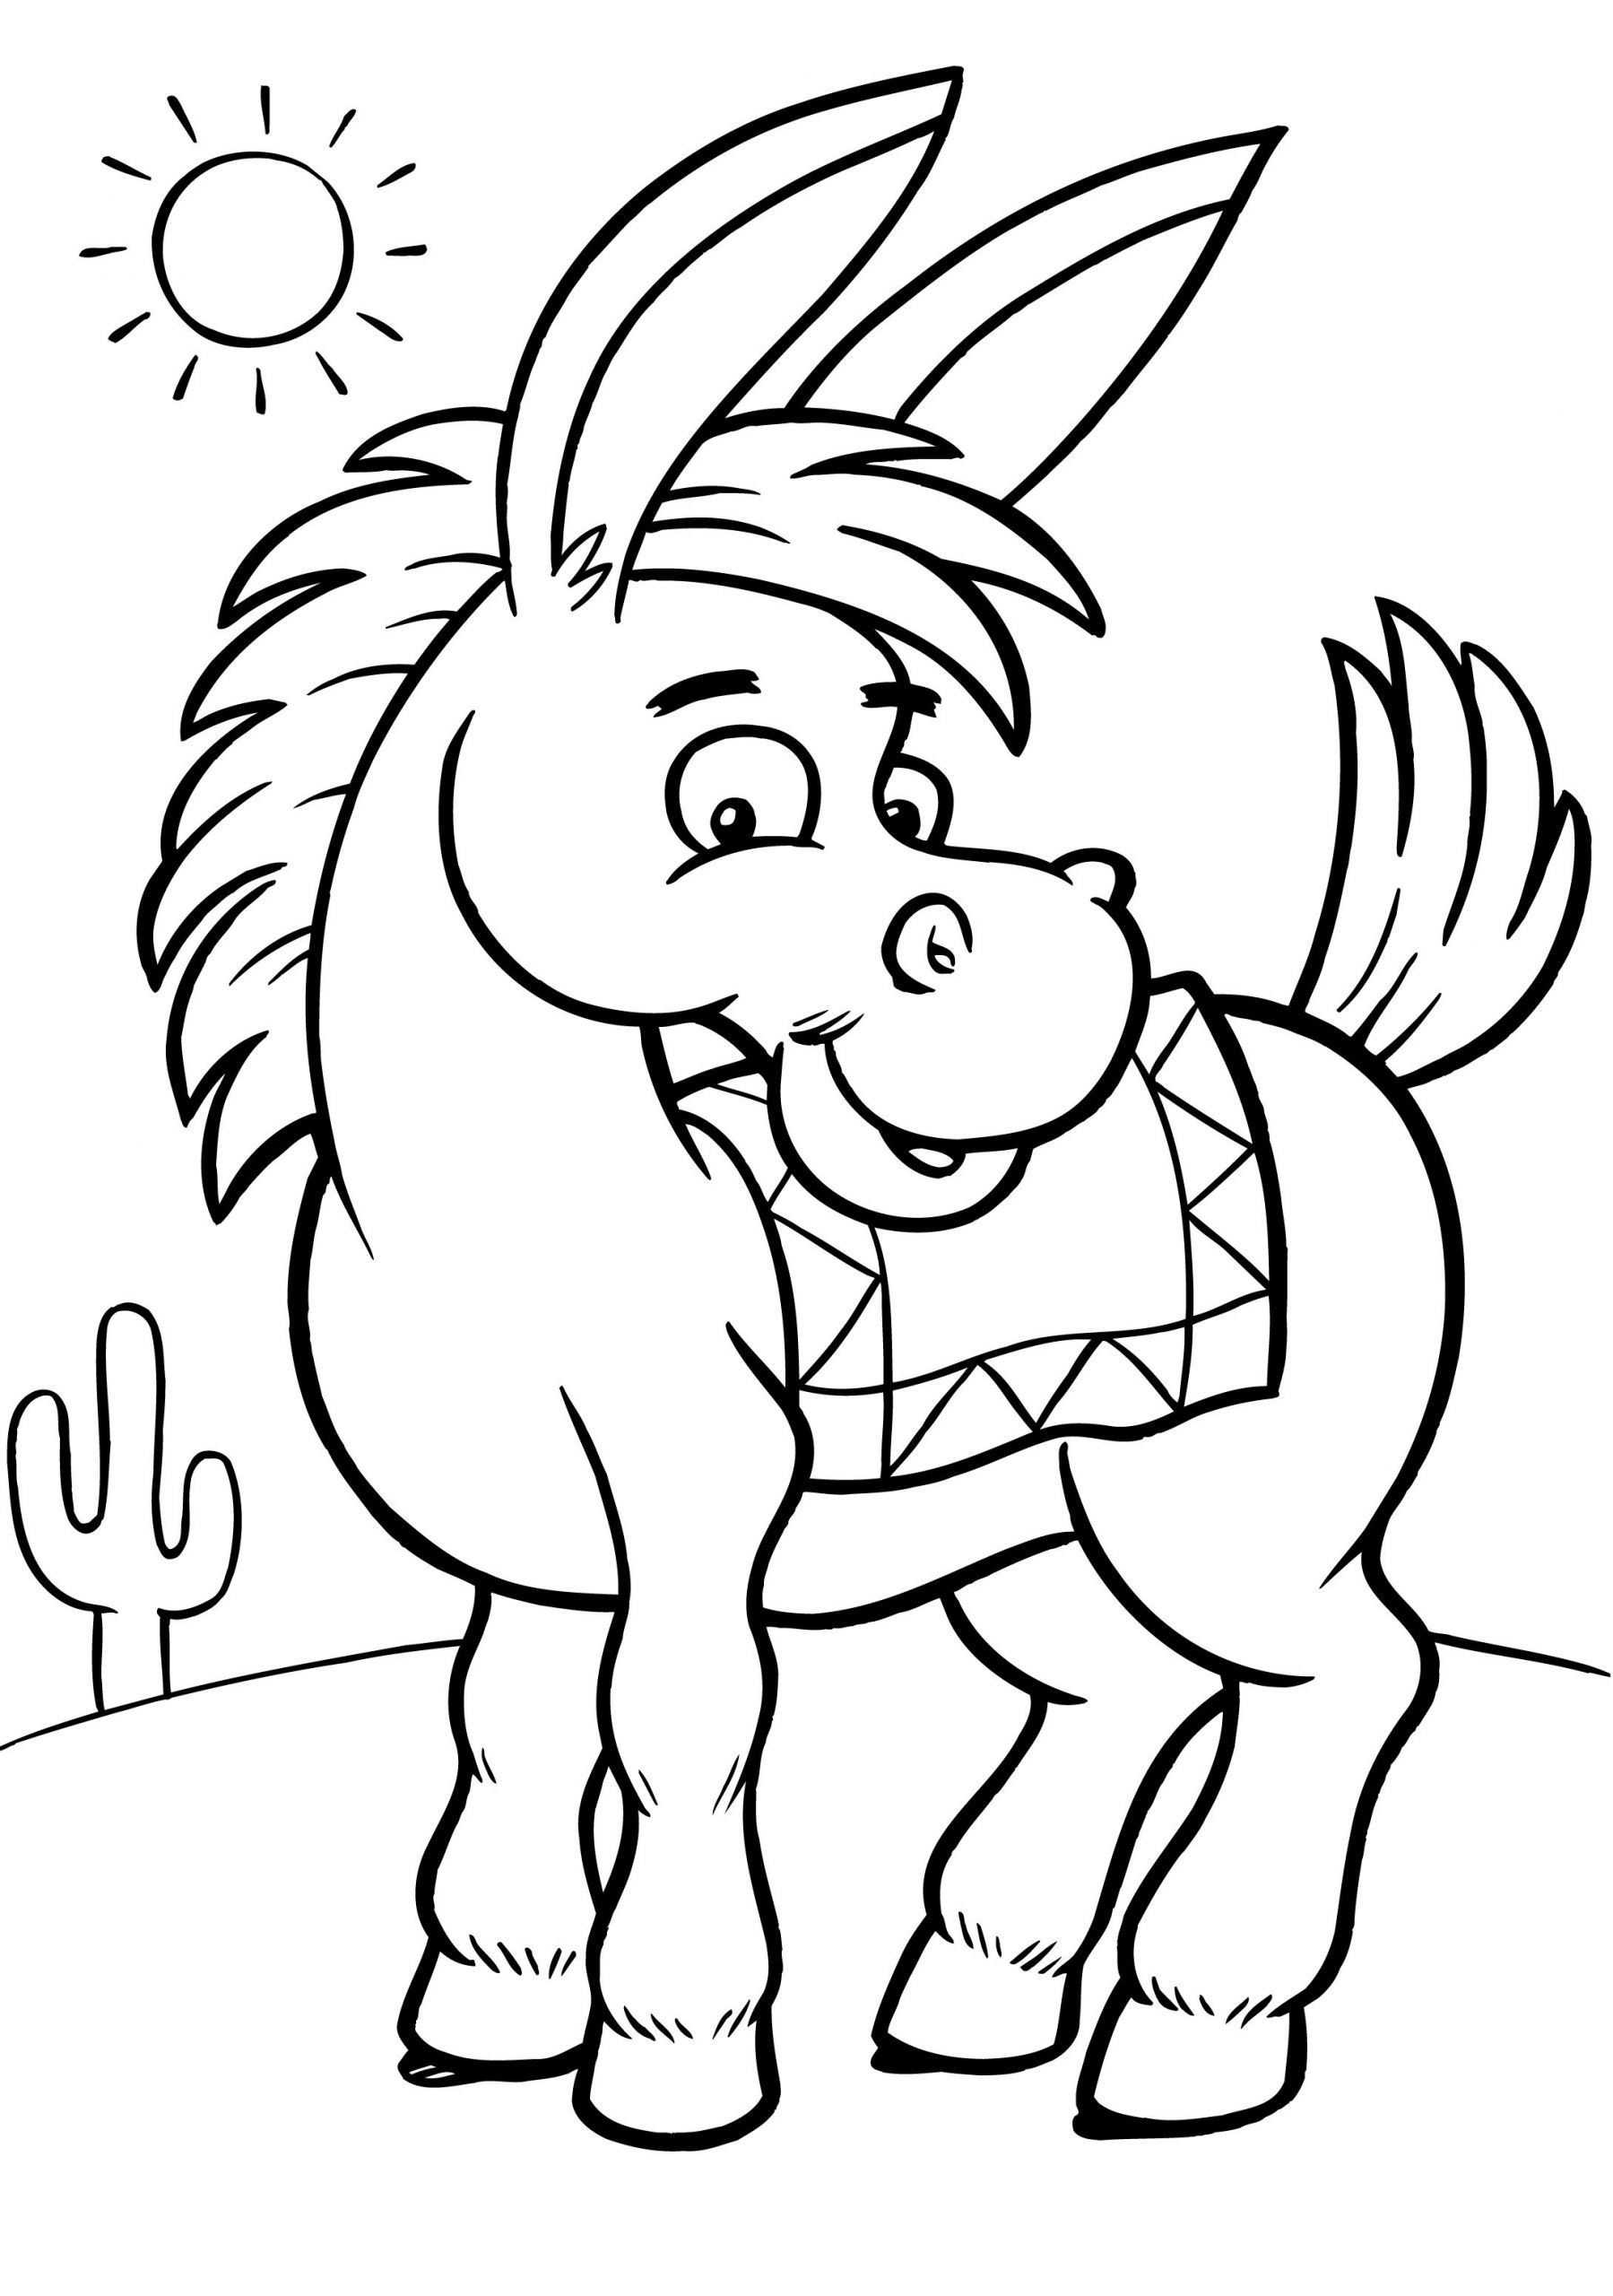 Free Coloring Pages For Kids To Print
 Free Printable Donkey Coloring Pages For Kids